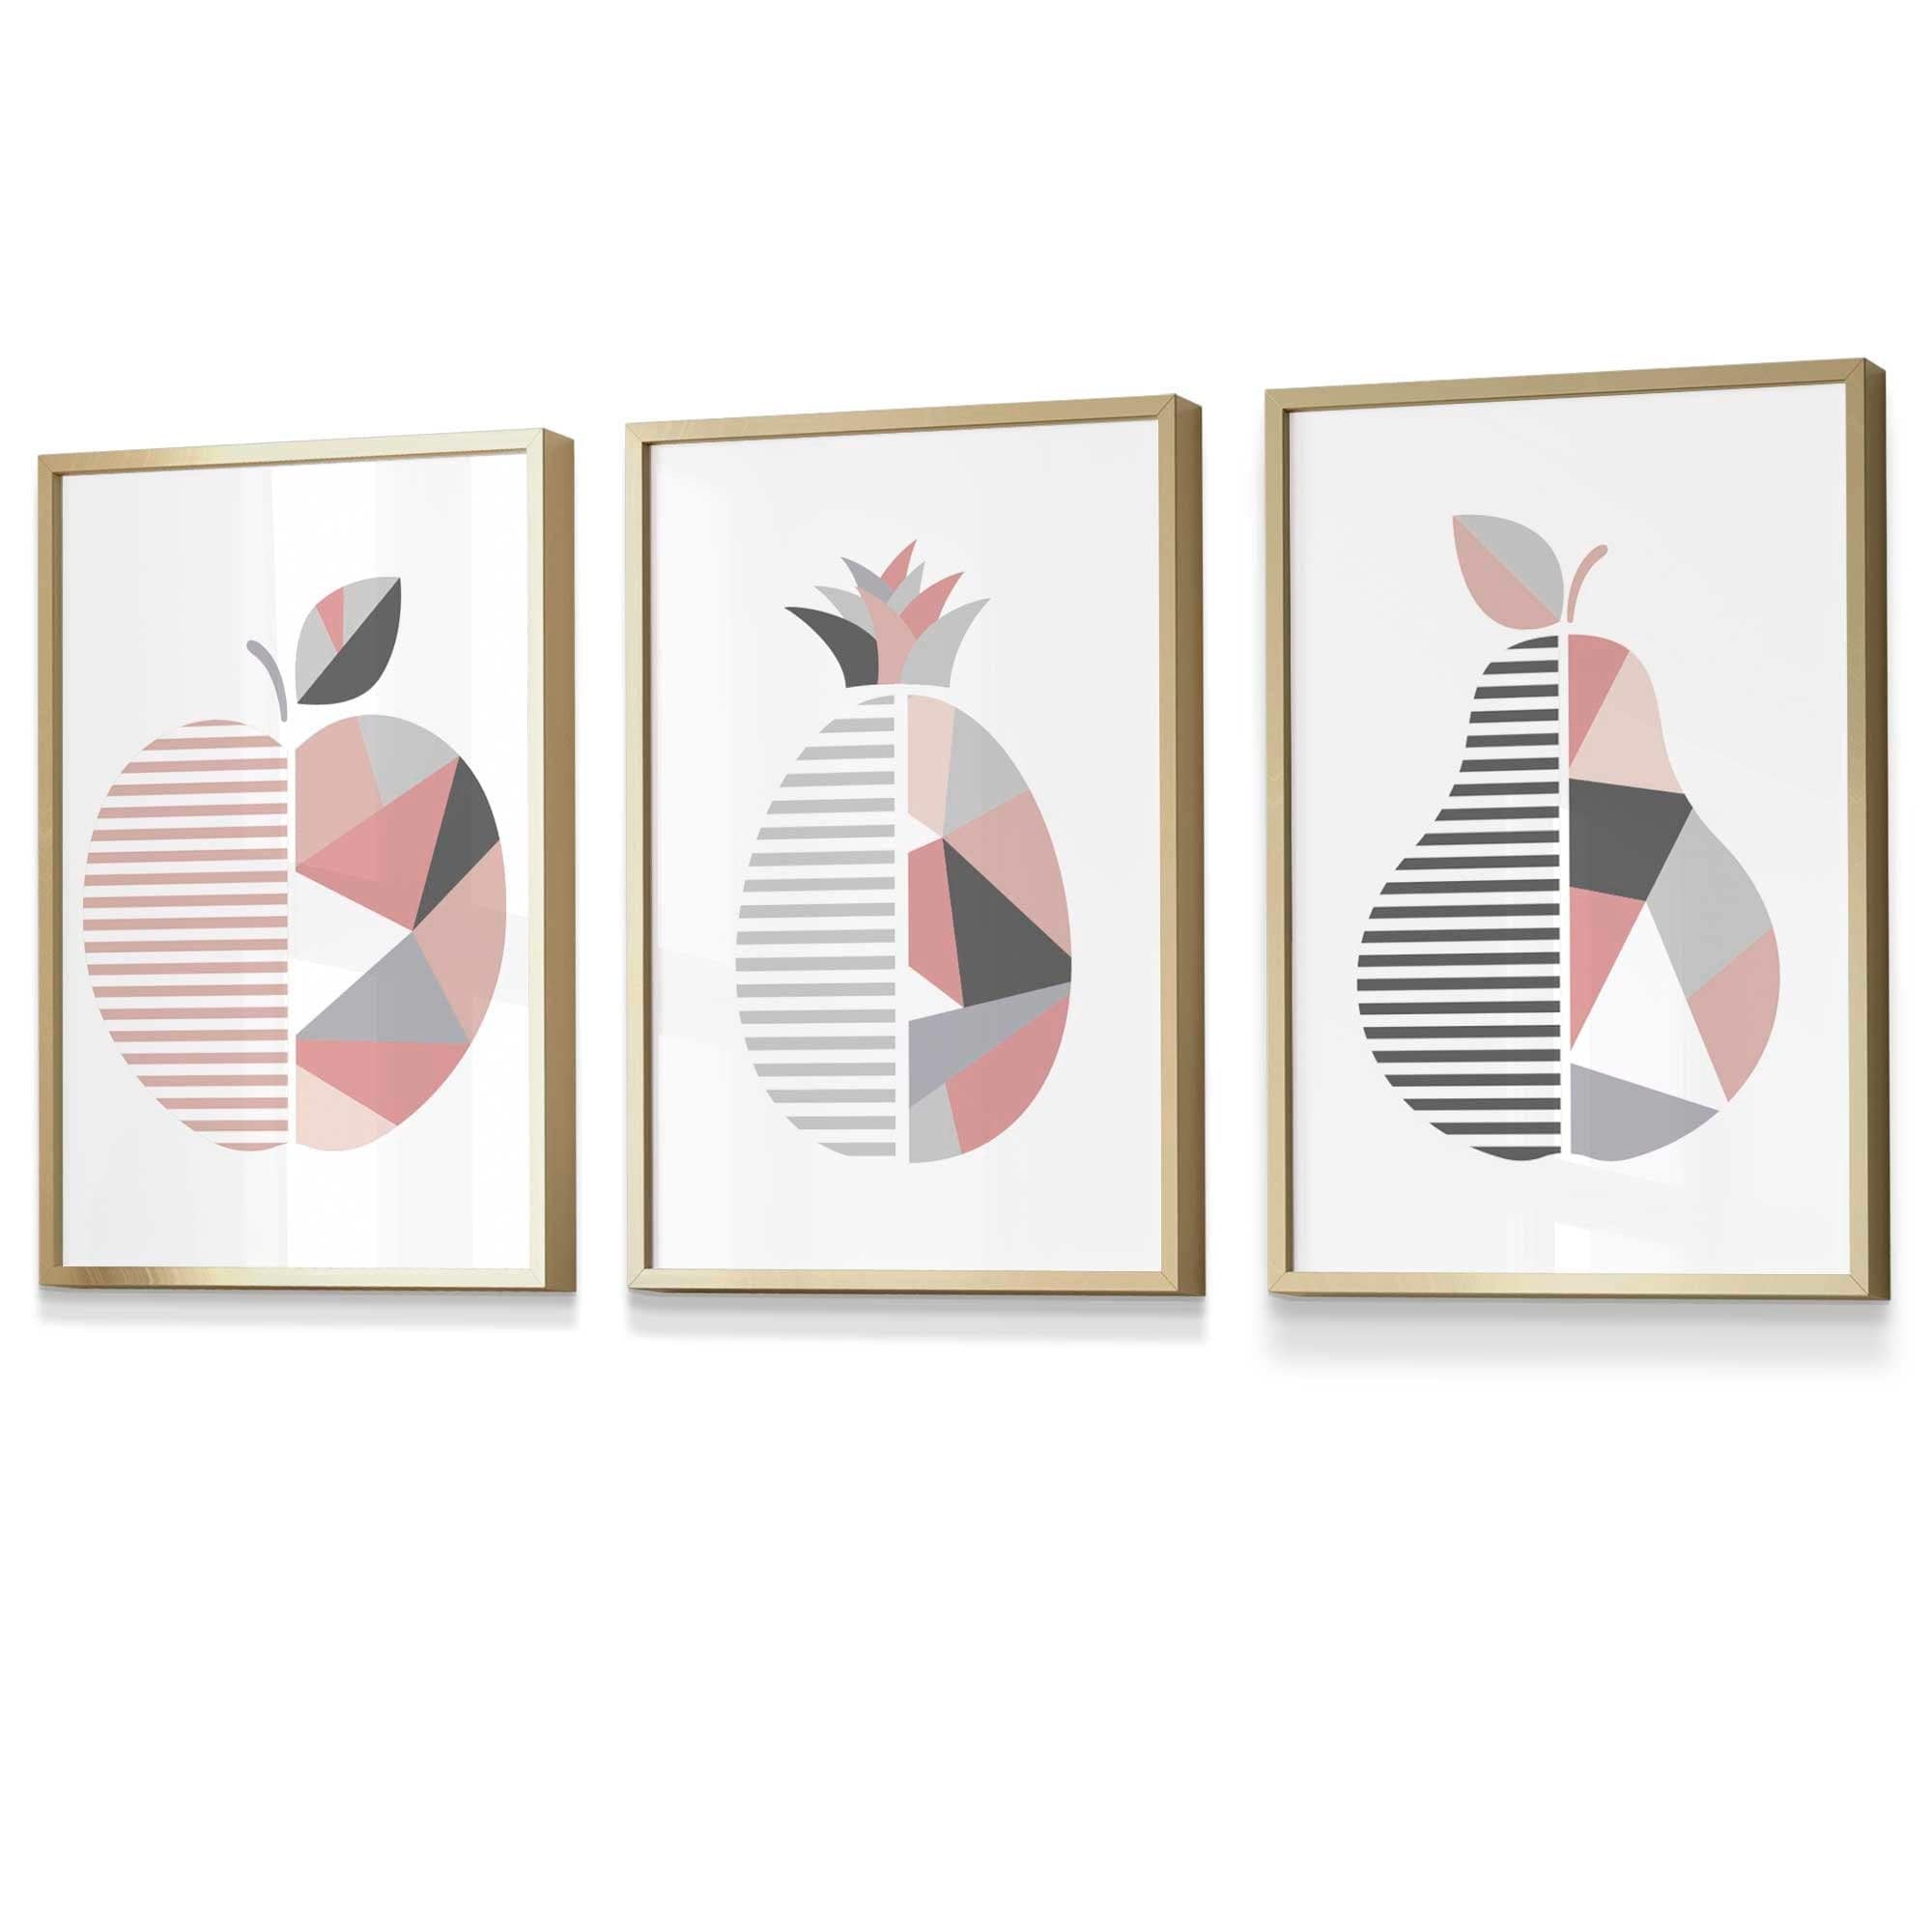 Set of 3 FRAMED Blush Pink and Grey Geometric Line Wall Art Fruit Featuring Apple Pear and Pineapple